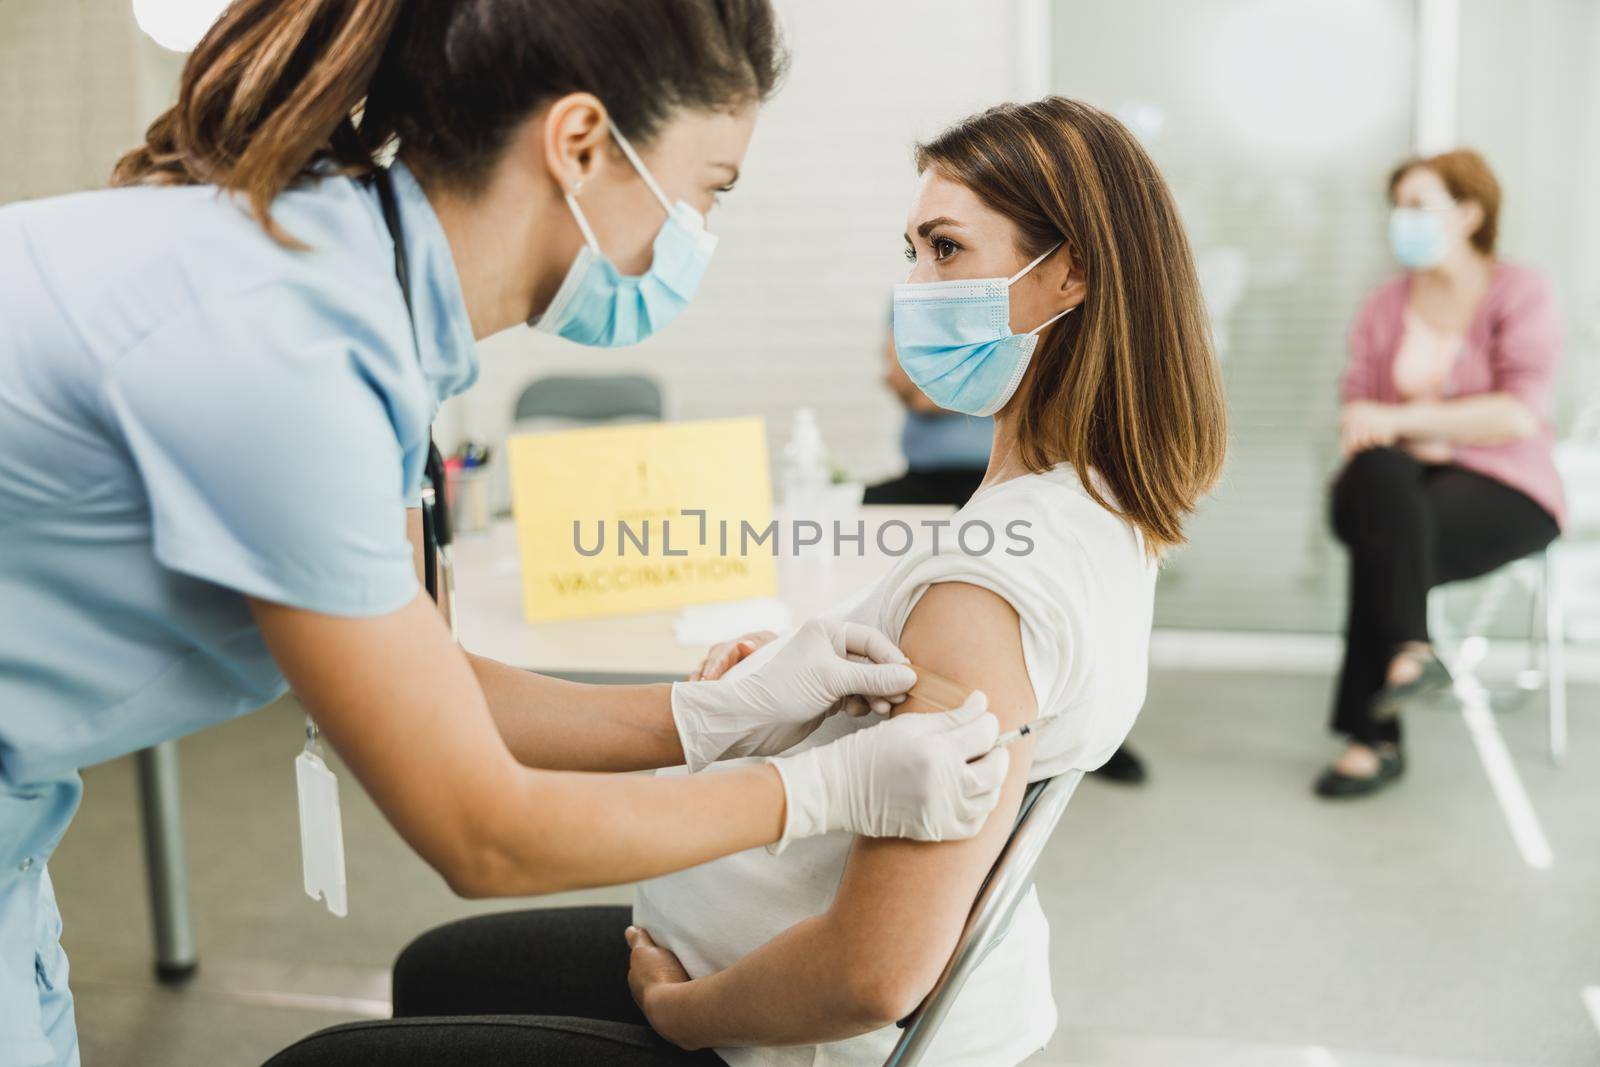 A nurse applying a band aid to a young pregnant woman after receiving a vaccine due to coronavirus epidemic.